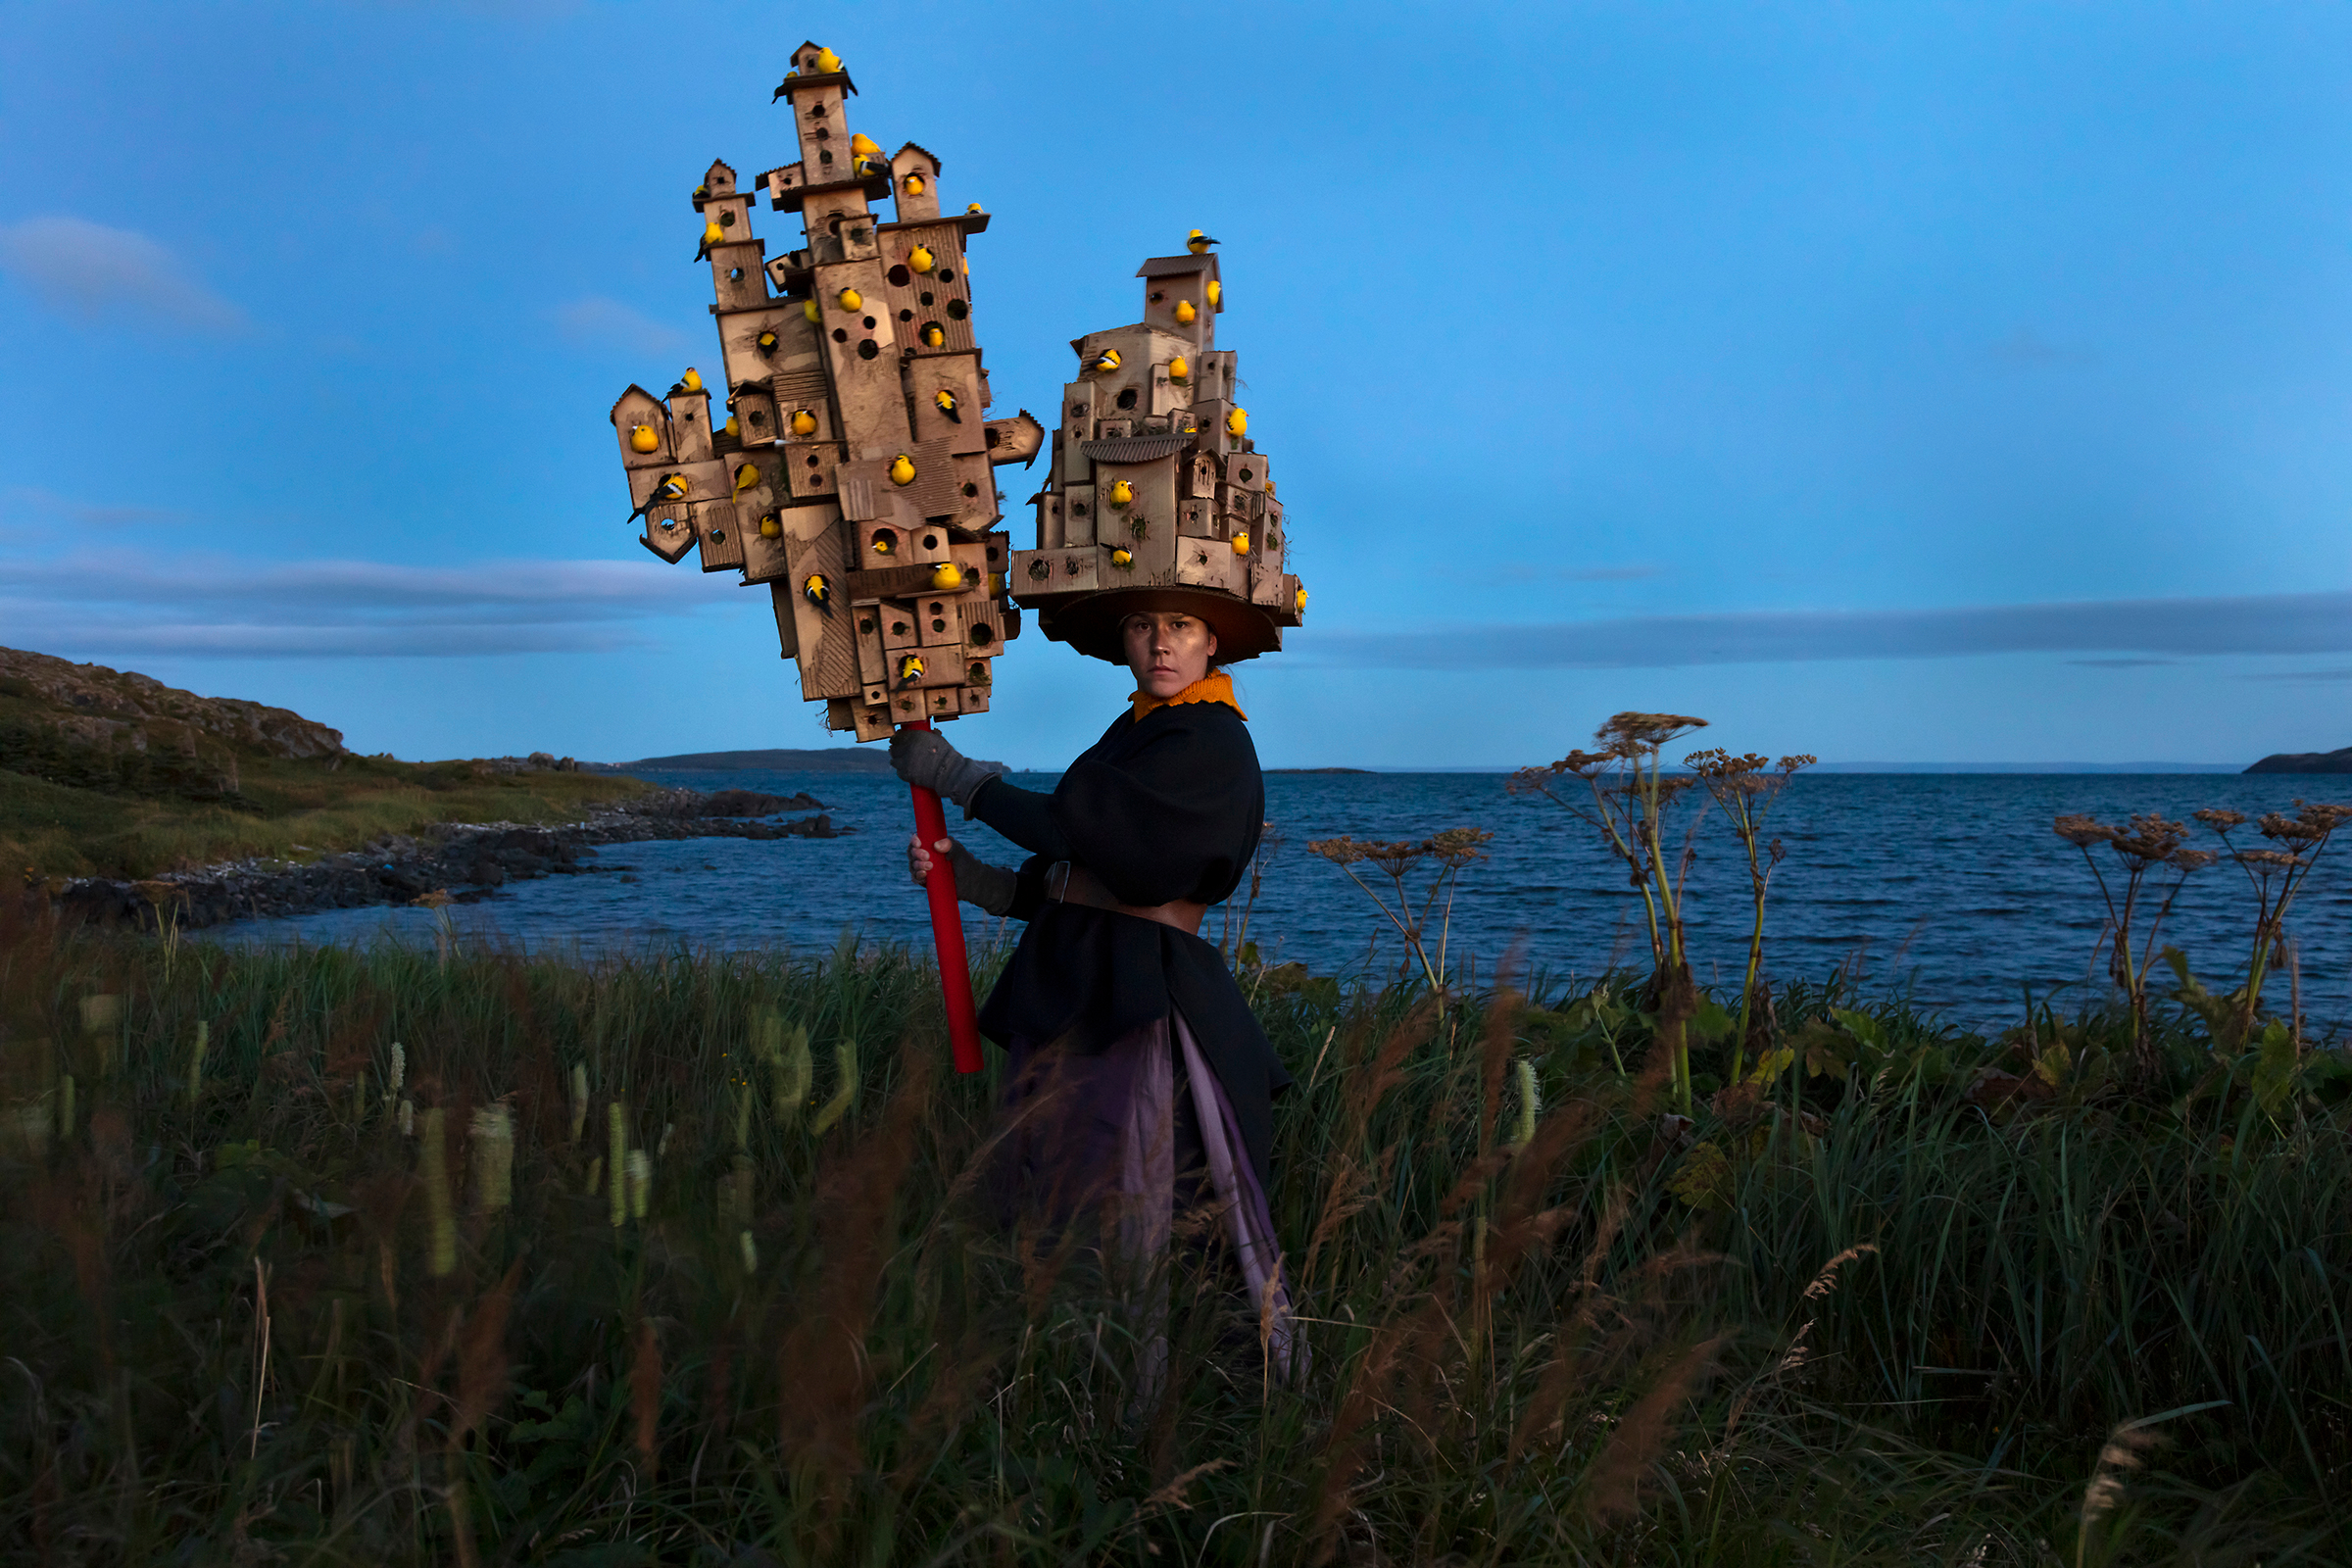     Meryl McMaster, Harbourage For a Song, 2019. From the series As Immense as the Sky. Courtesy of the artist, Stephen Bulger Gallery and Pierre-François Ouellette art contemporain.

